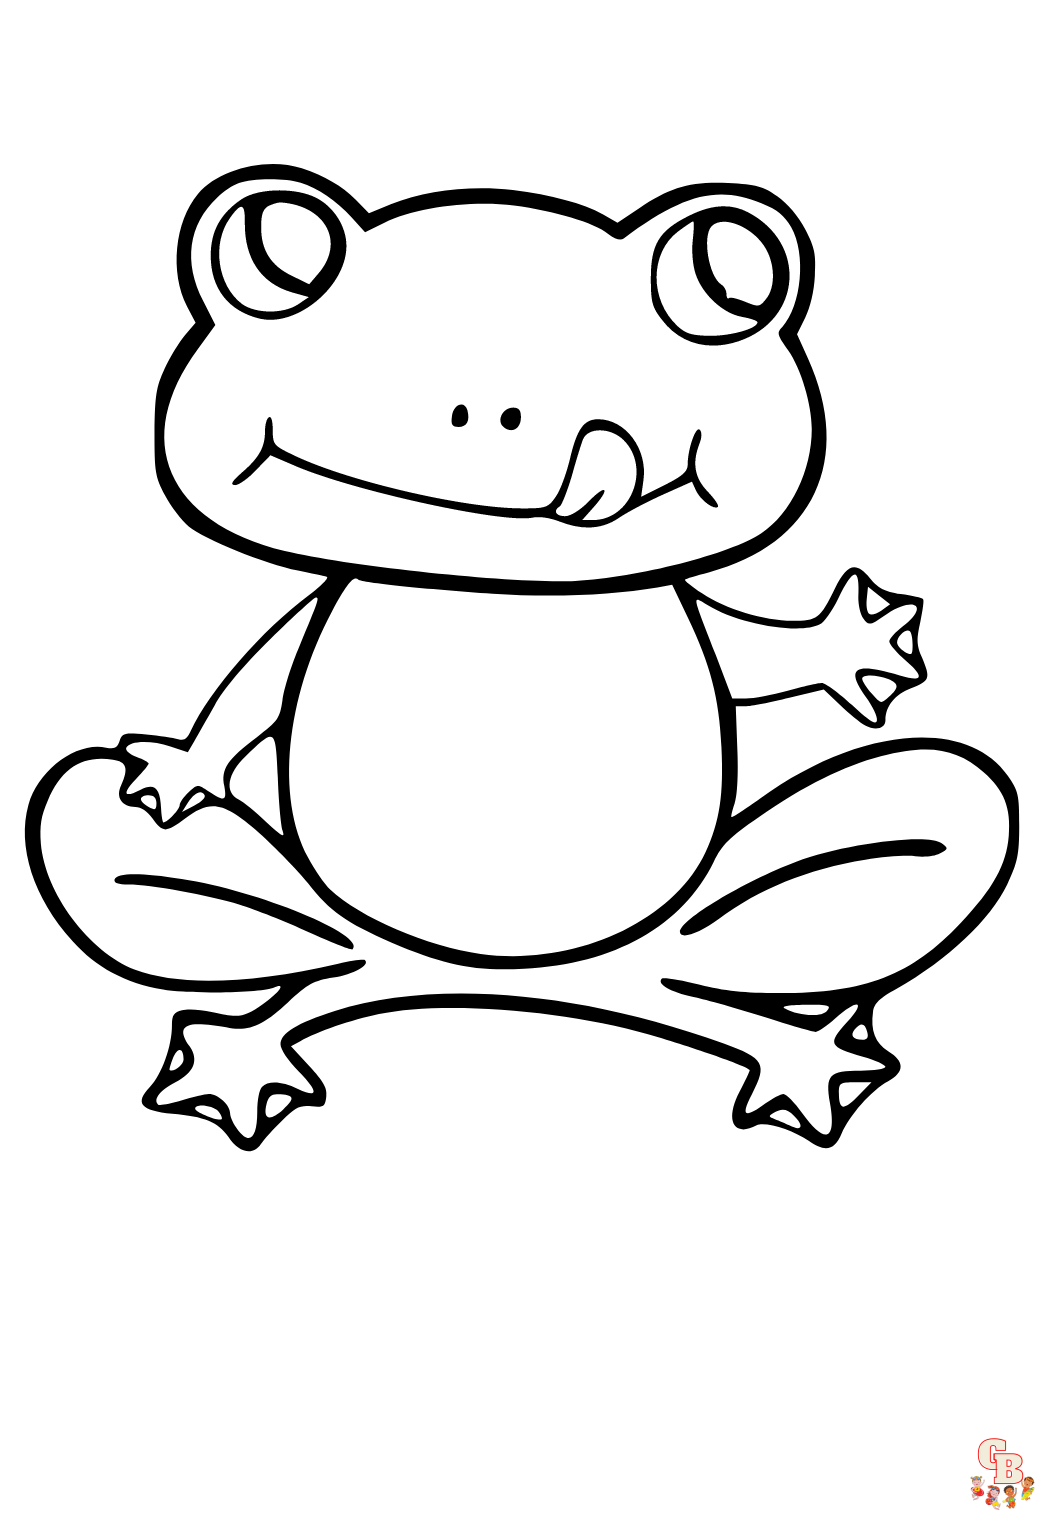 Cute Frog coloring pages easy